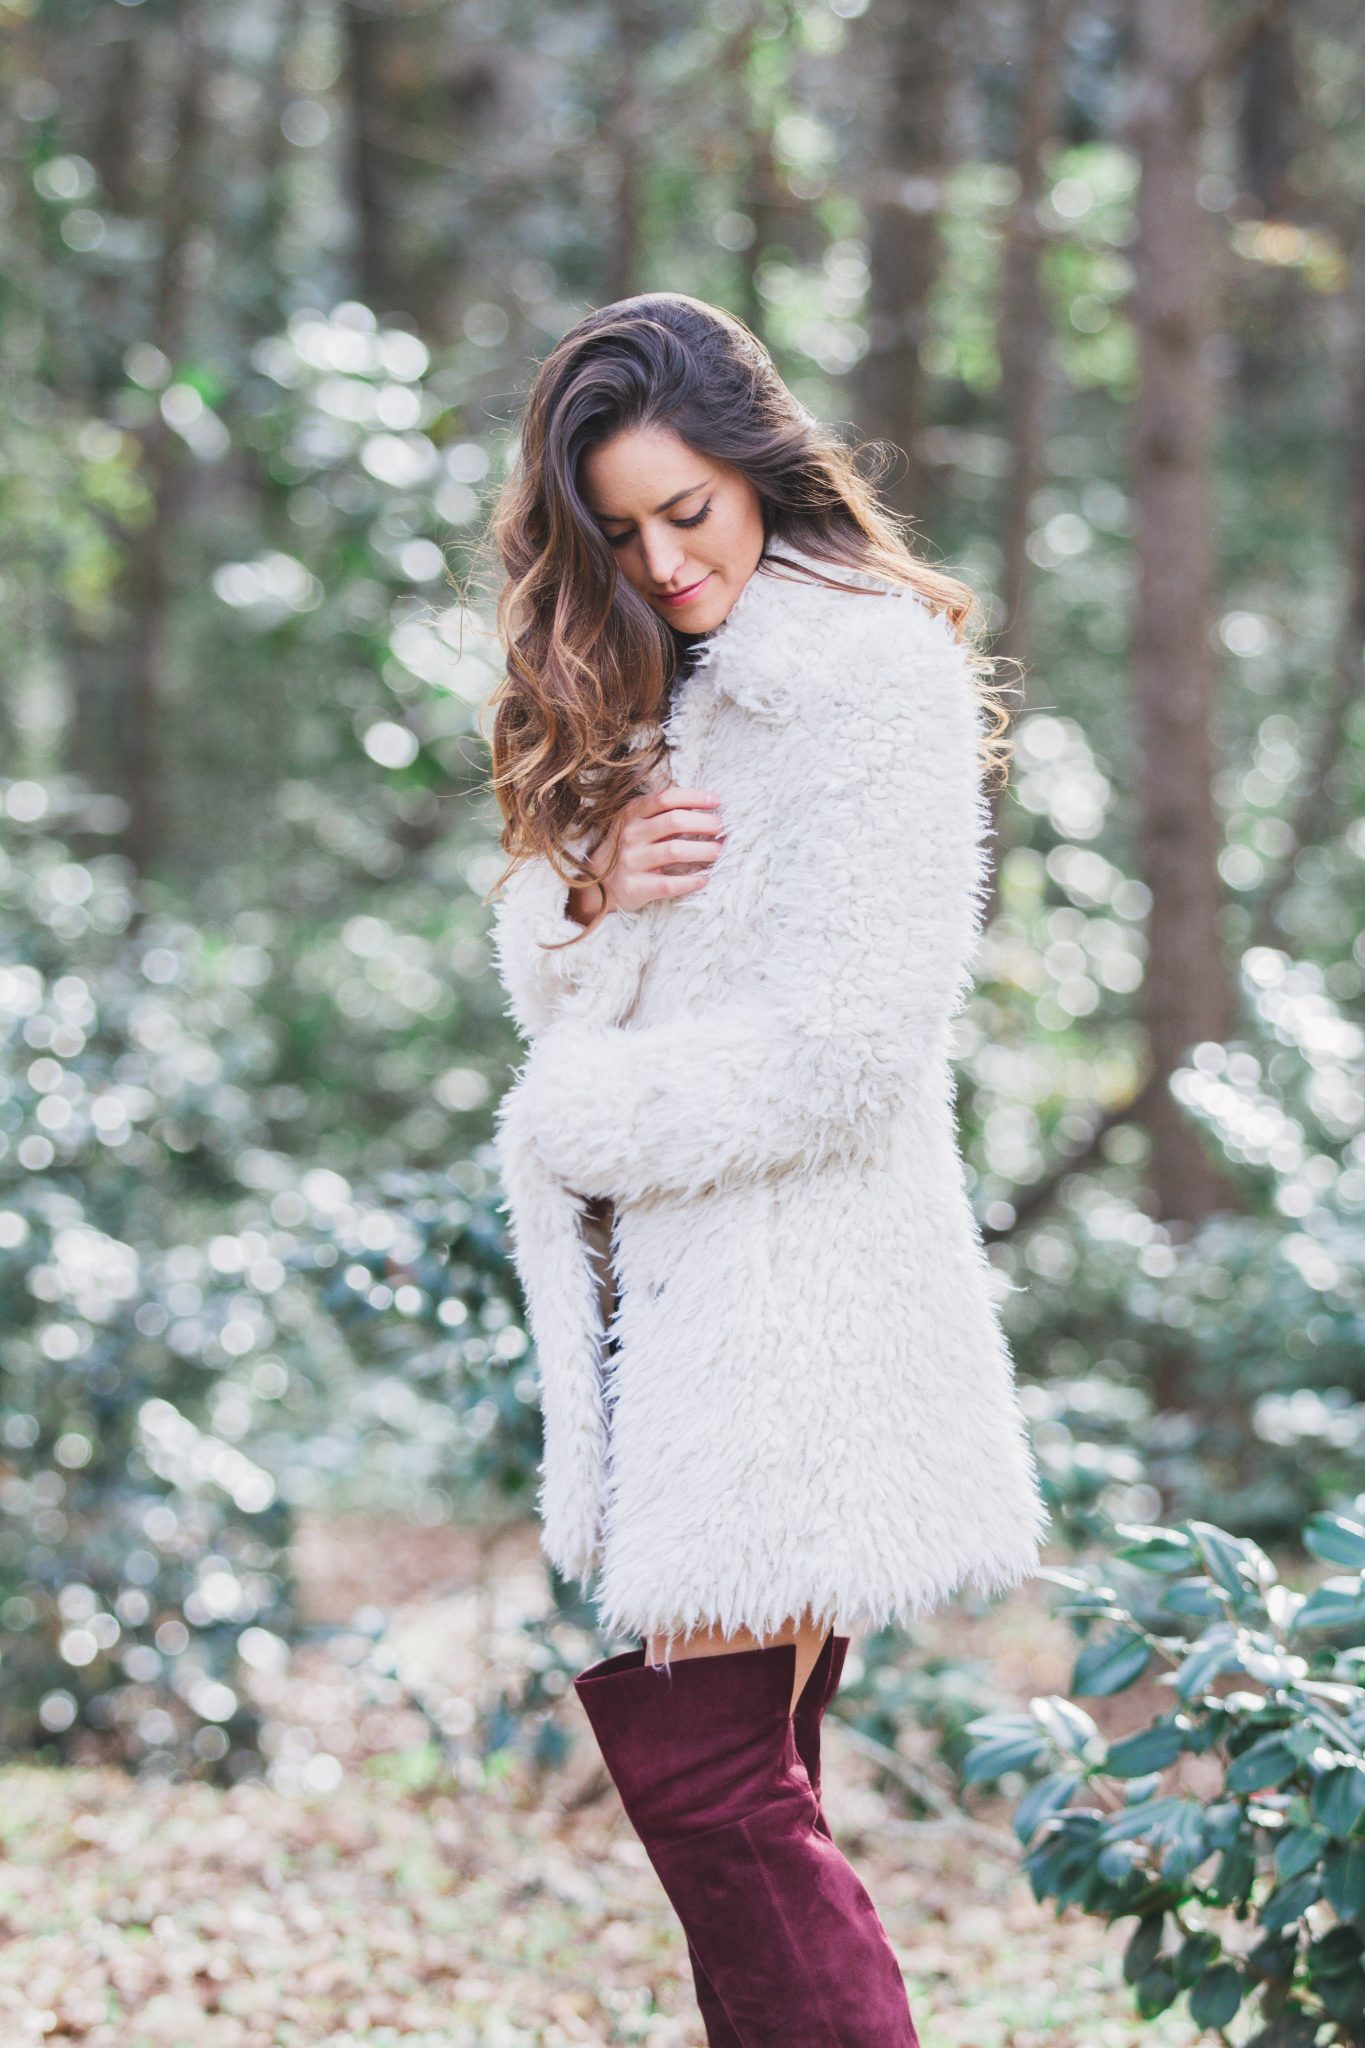 how to wear a romper in the winter, how to style a romper for winter, furry coat, big fuzzy coat, burgundy over the knee boots, chic winter style